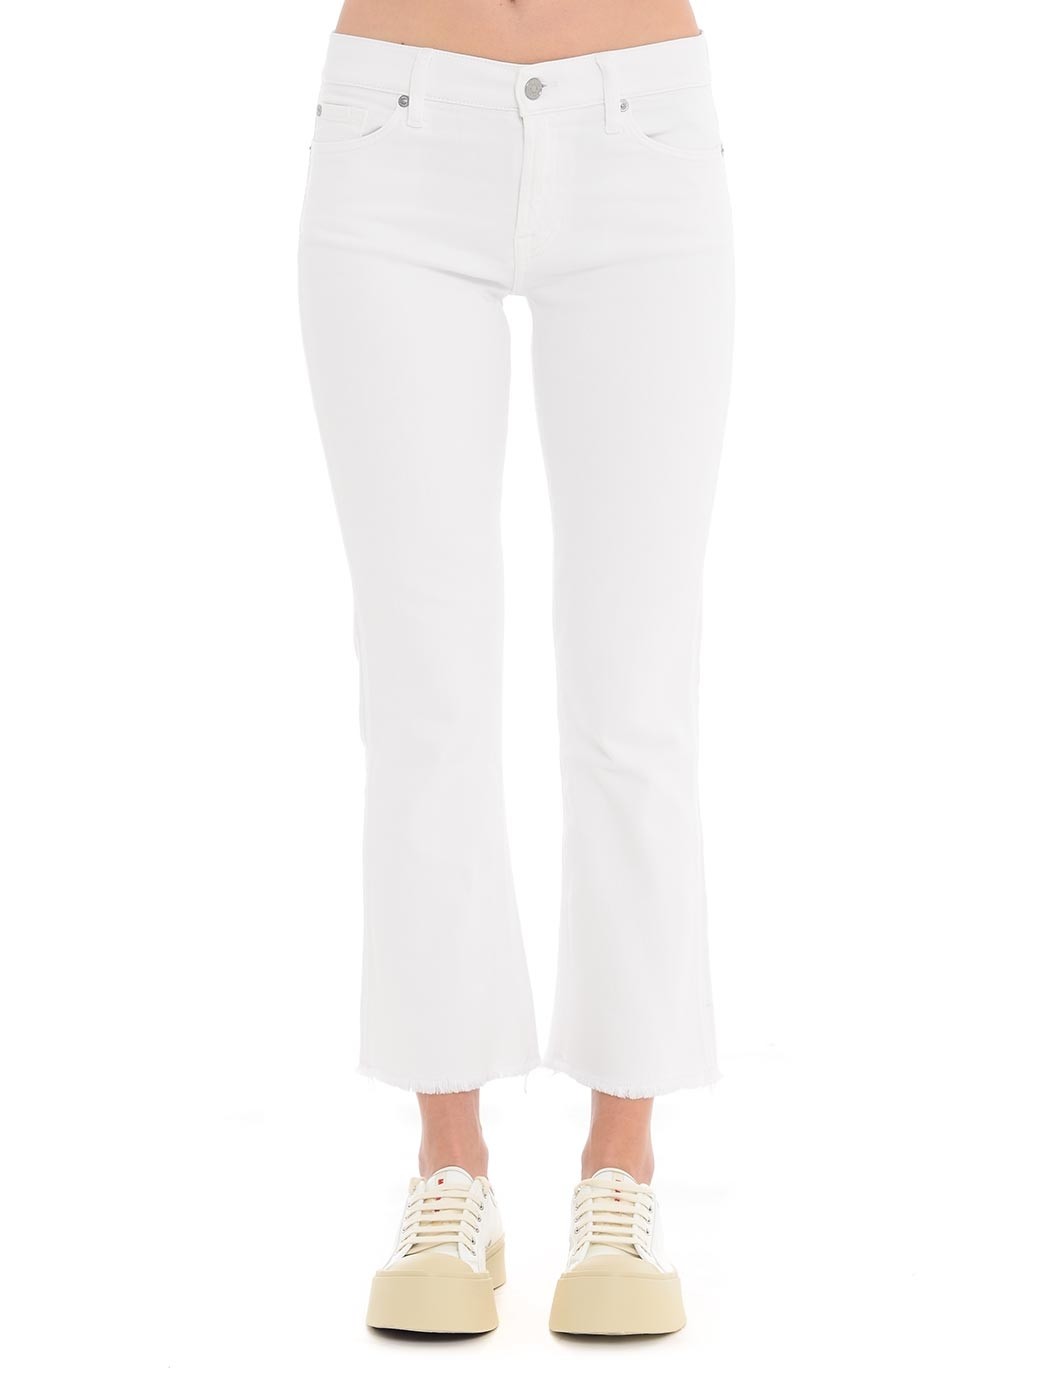  WOMAN TROUSERS,PALAZZO TROUSERS,SKINNY TROUSERS,MARNI TROUSERS,FORTE FORTE TROUSERS,8PM TROUSERS,MSGM TROUSERS,CROP PANTS  7 FOR ALL MANKIND JSABC130